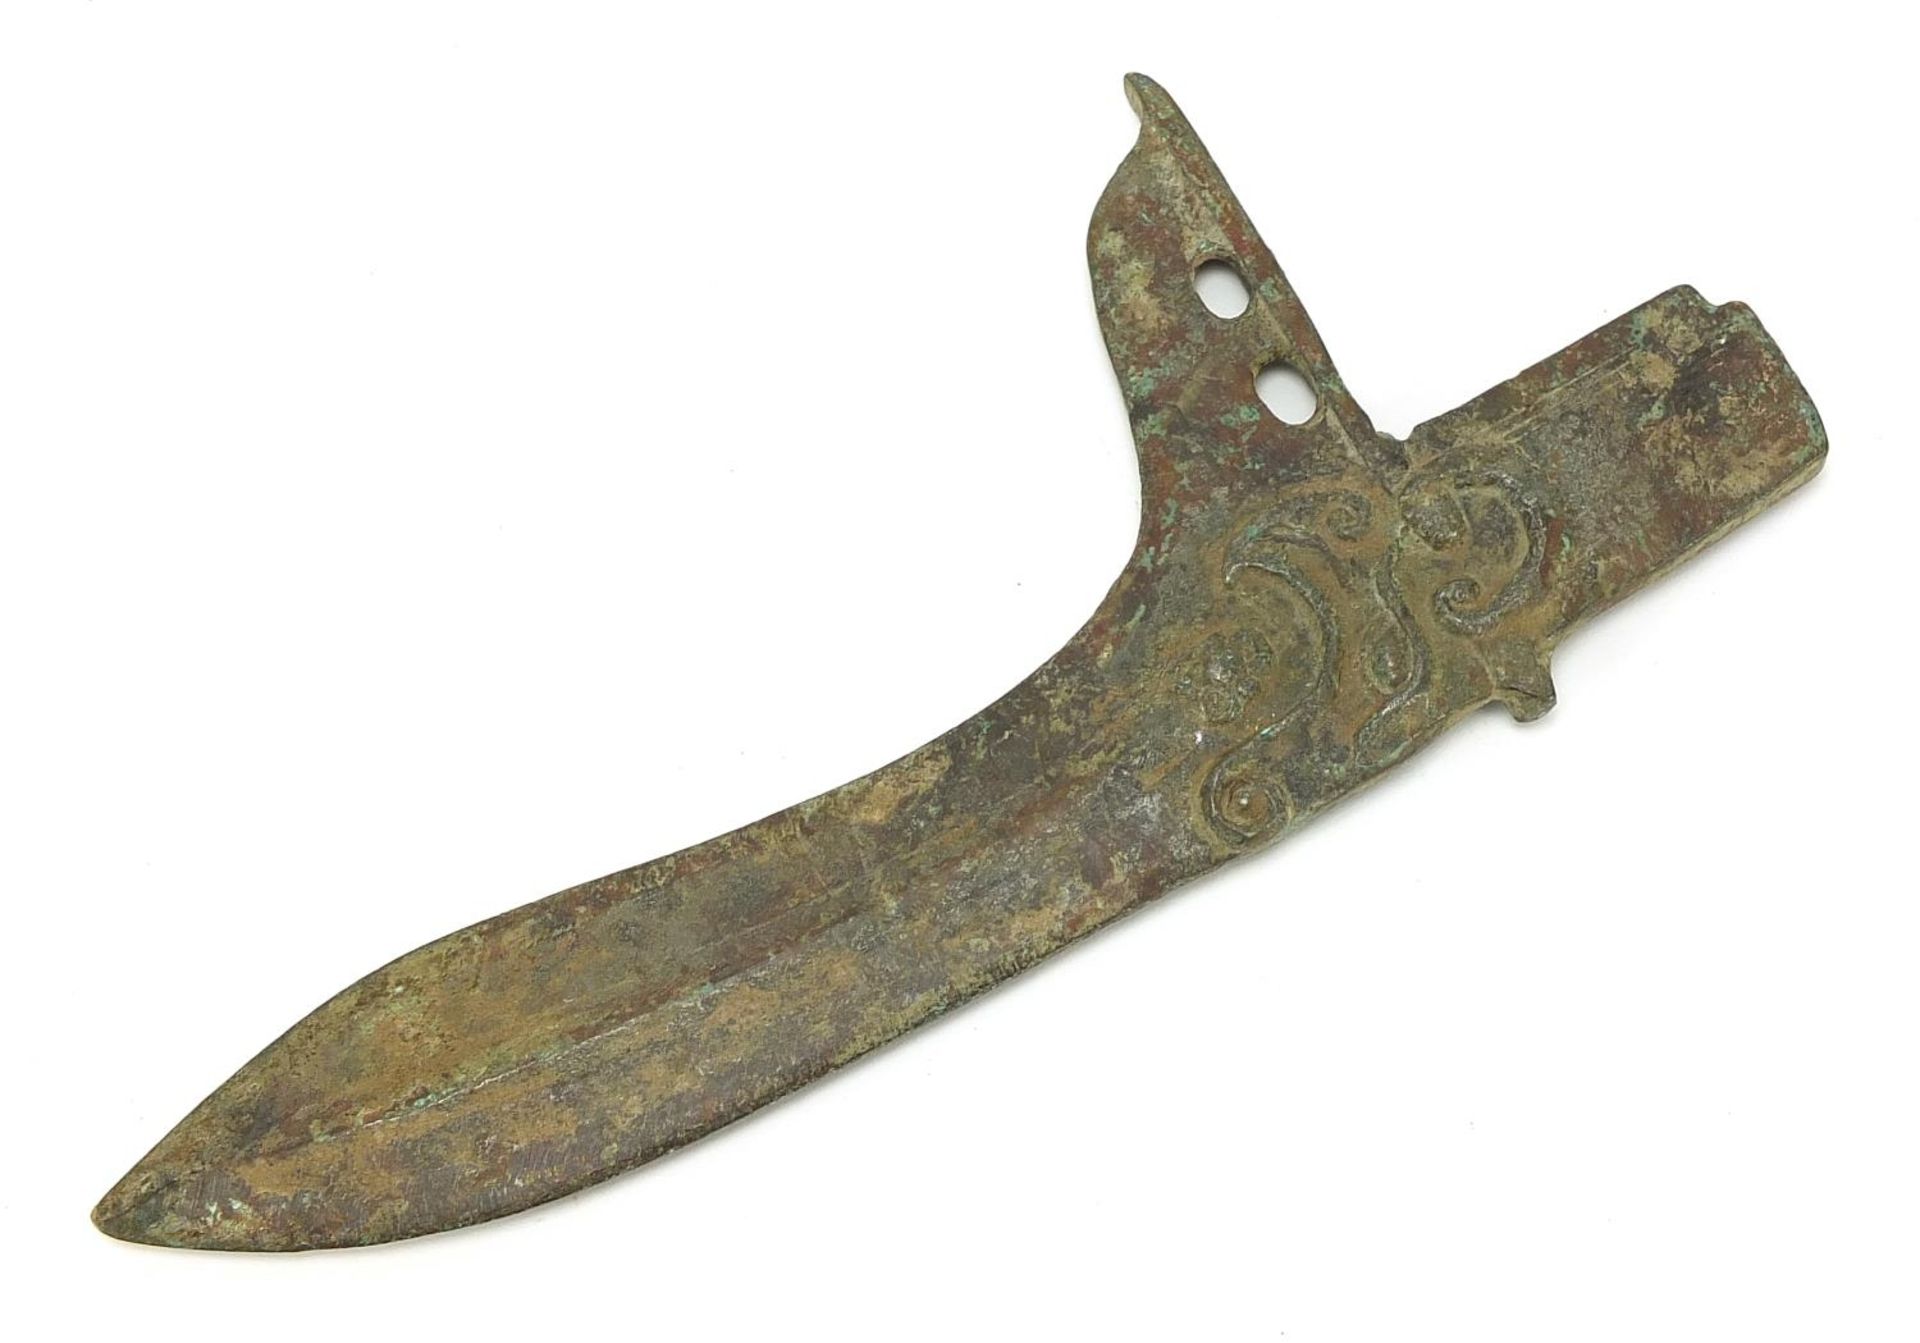 Chinese/Islamic patinated axe head, 24cm in length